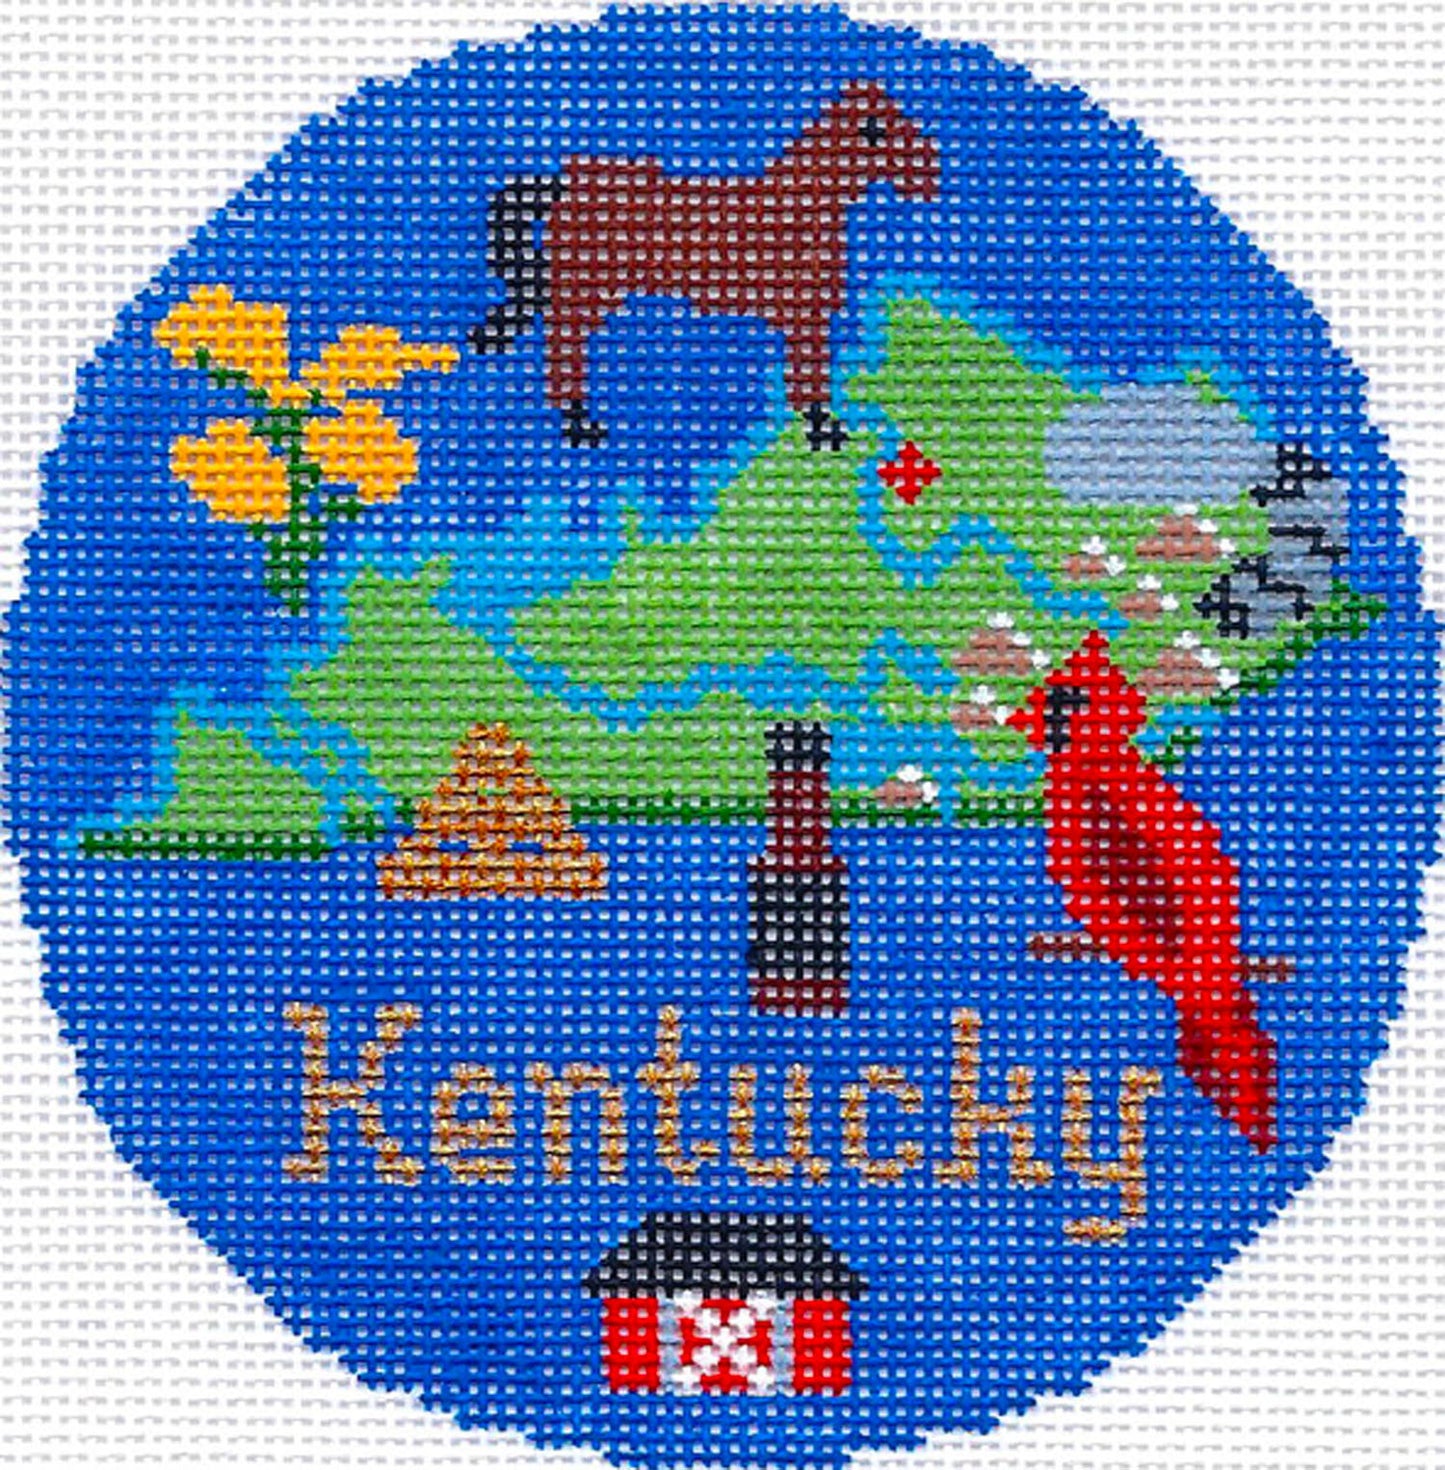 Travel Round ~ KENTUCKY handpainted 4.25" Needlepoint Ornament Canvas by Silver Needle